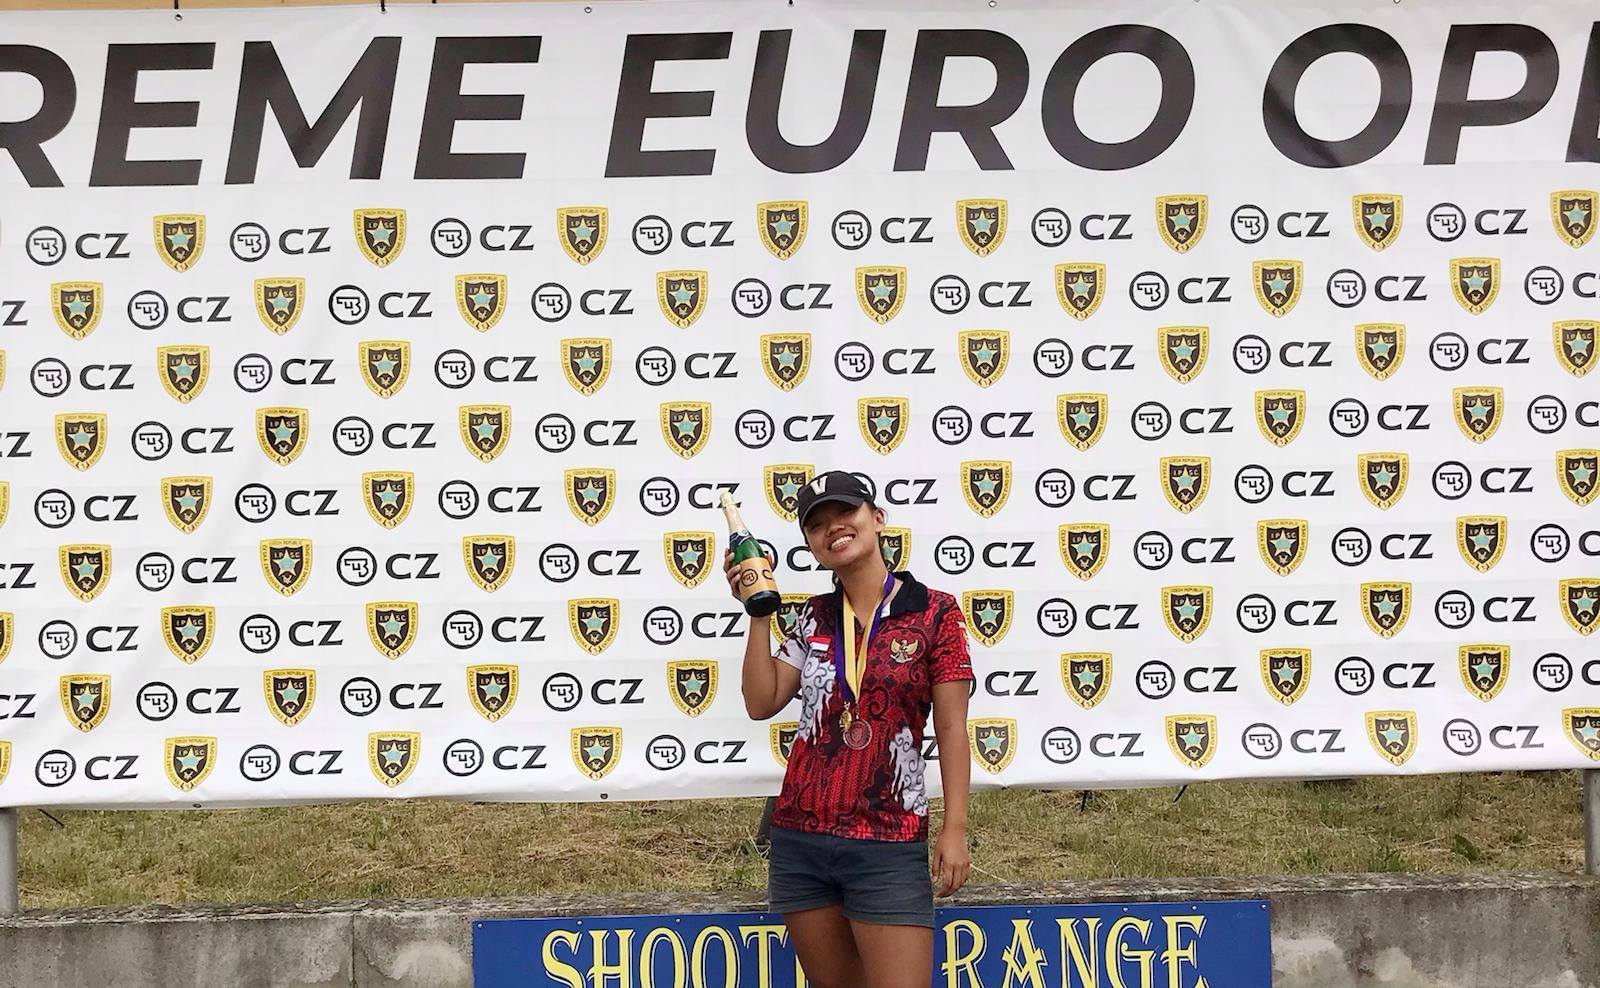 Sarah Ayu Tamaela, a young shooting athlete from Bali, won the Lady Open and Shoot Off categories at the 2019 CZ Exreme Euro Open. Photo: Humas Polda Bali / Facebook